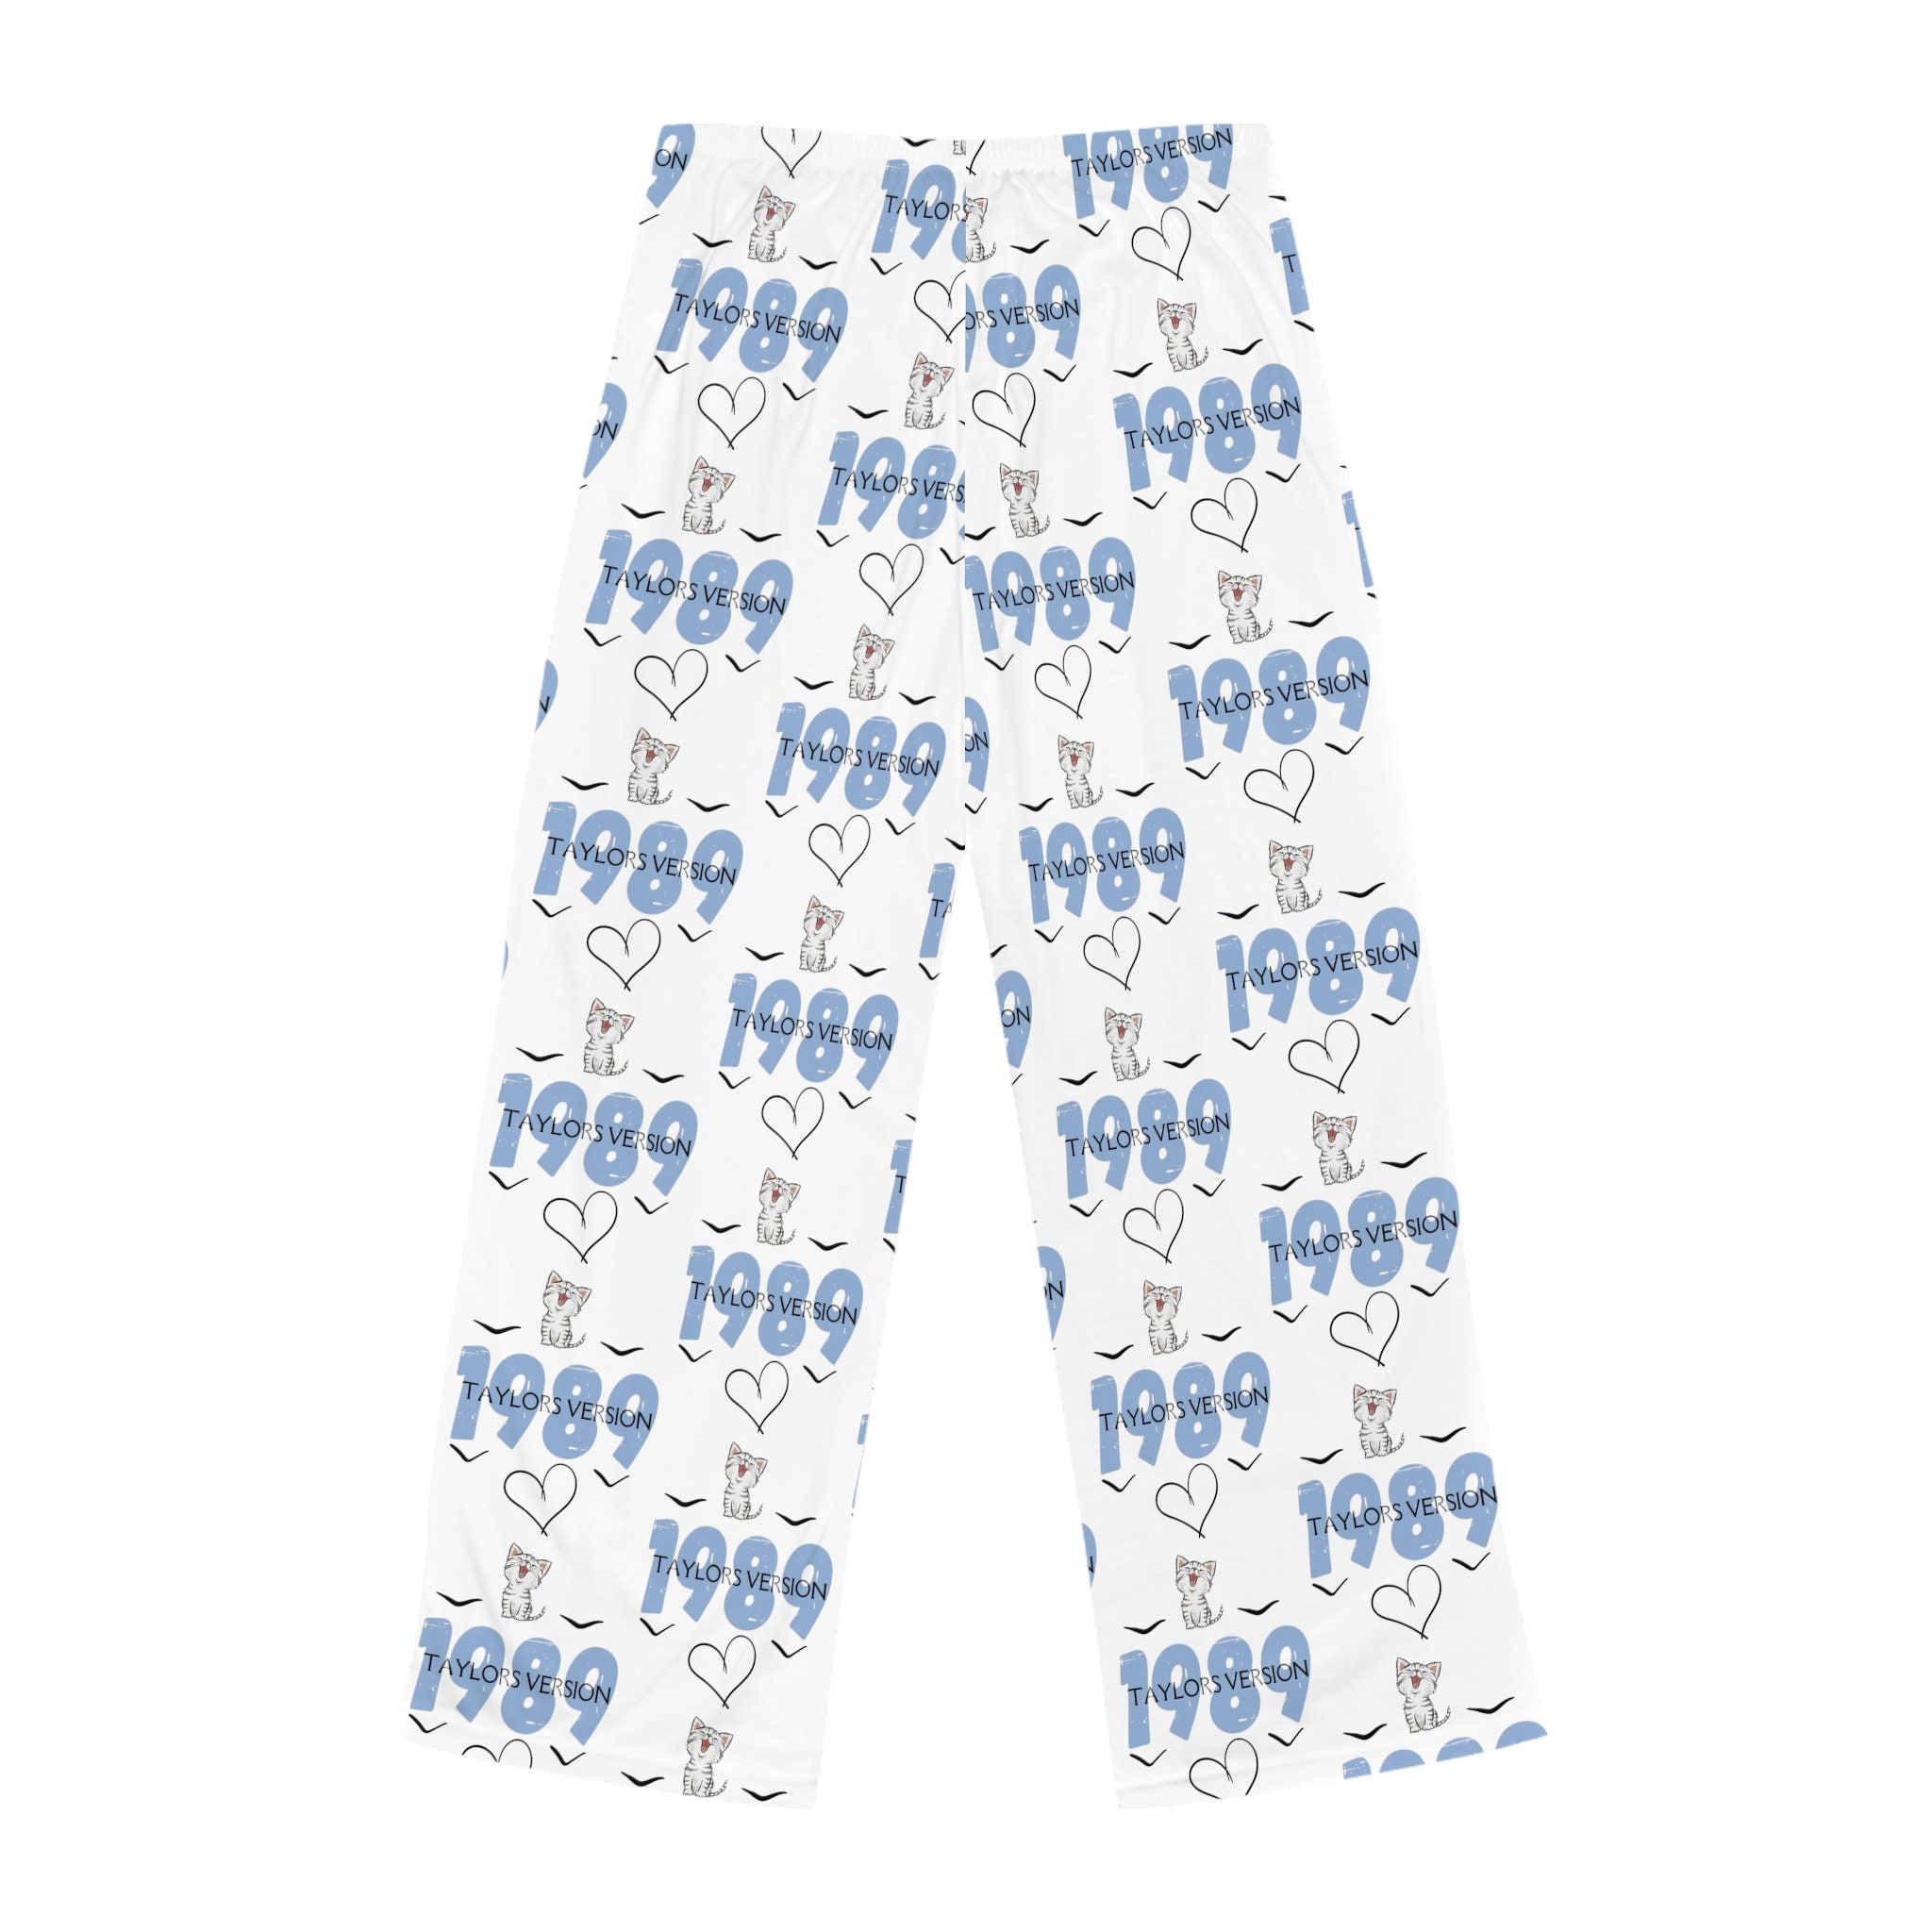 Taylor Pajamas Adult taylor version Pajama Pants, Taylor Merch, Gift For Mother's day